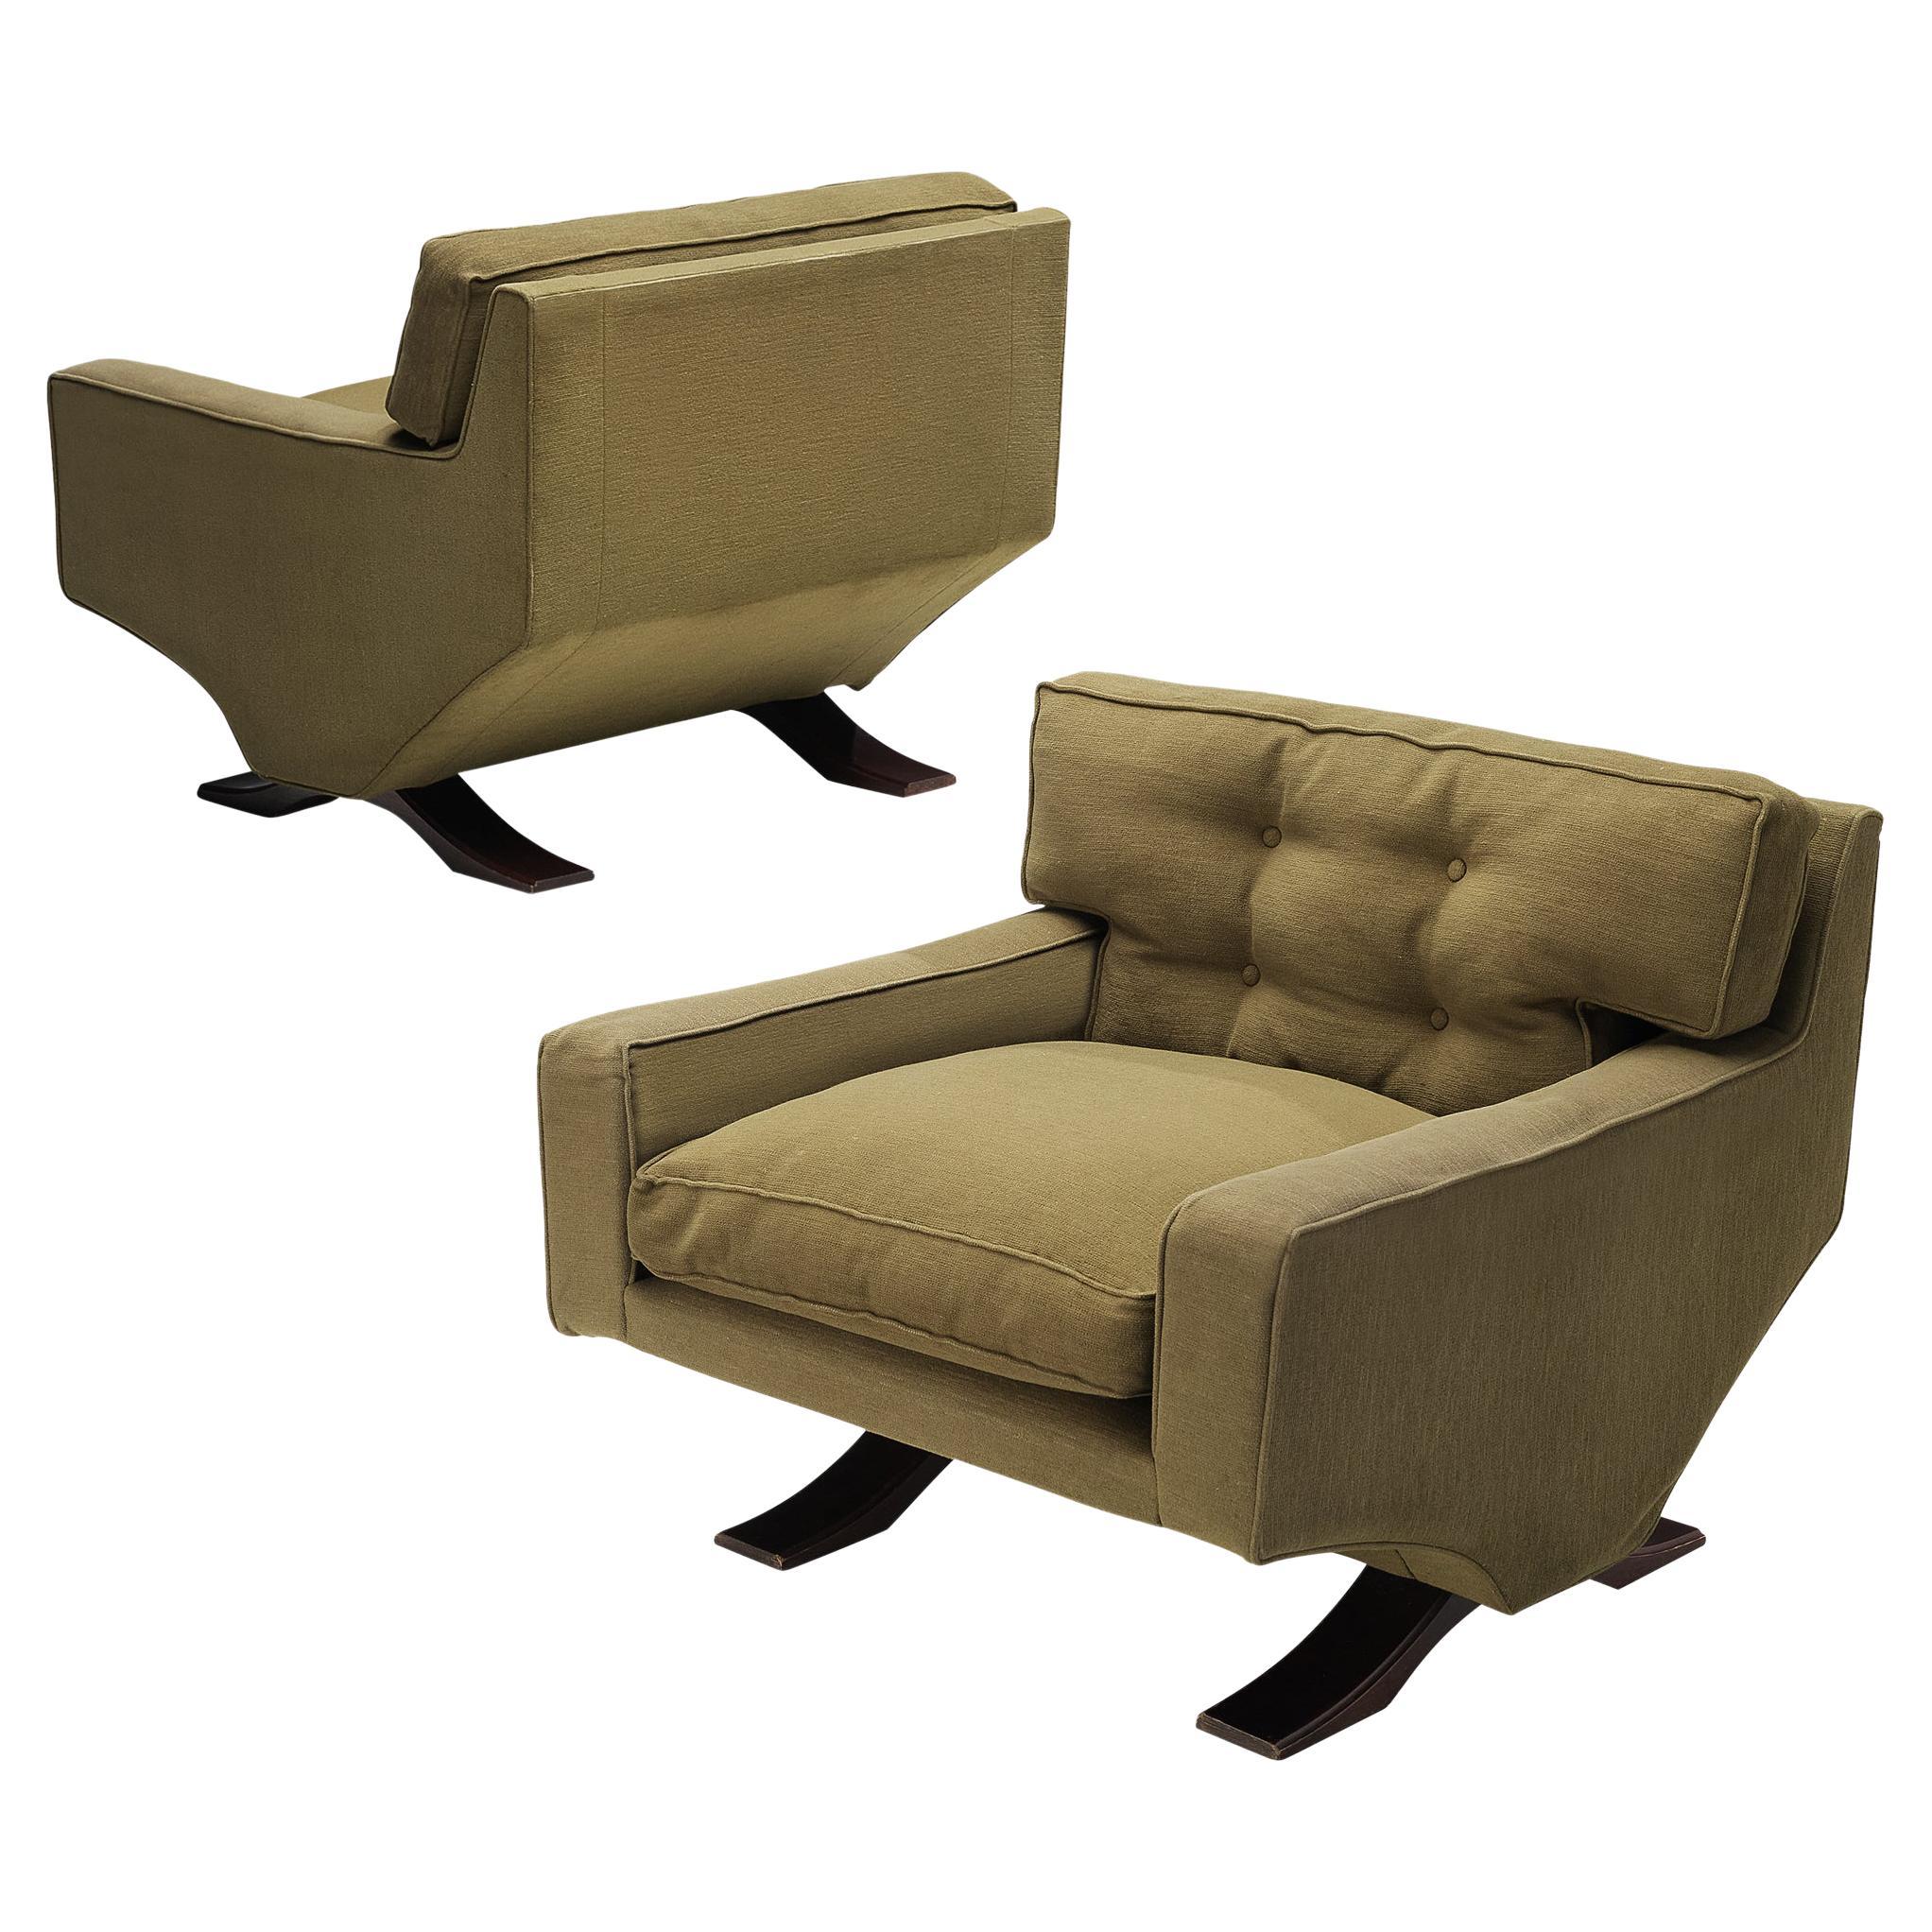 Franz Sartori for Flexform Pair of Lounge Chairs in Olive Green Upholstery